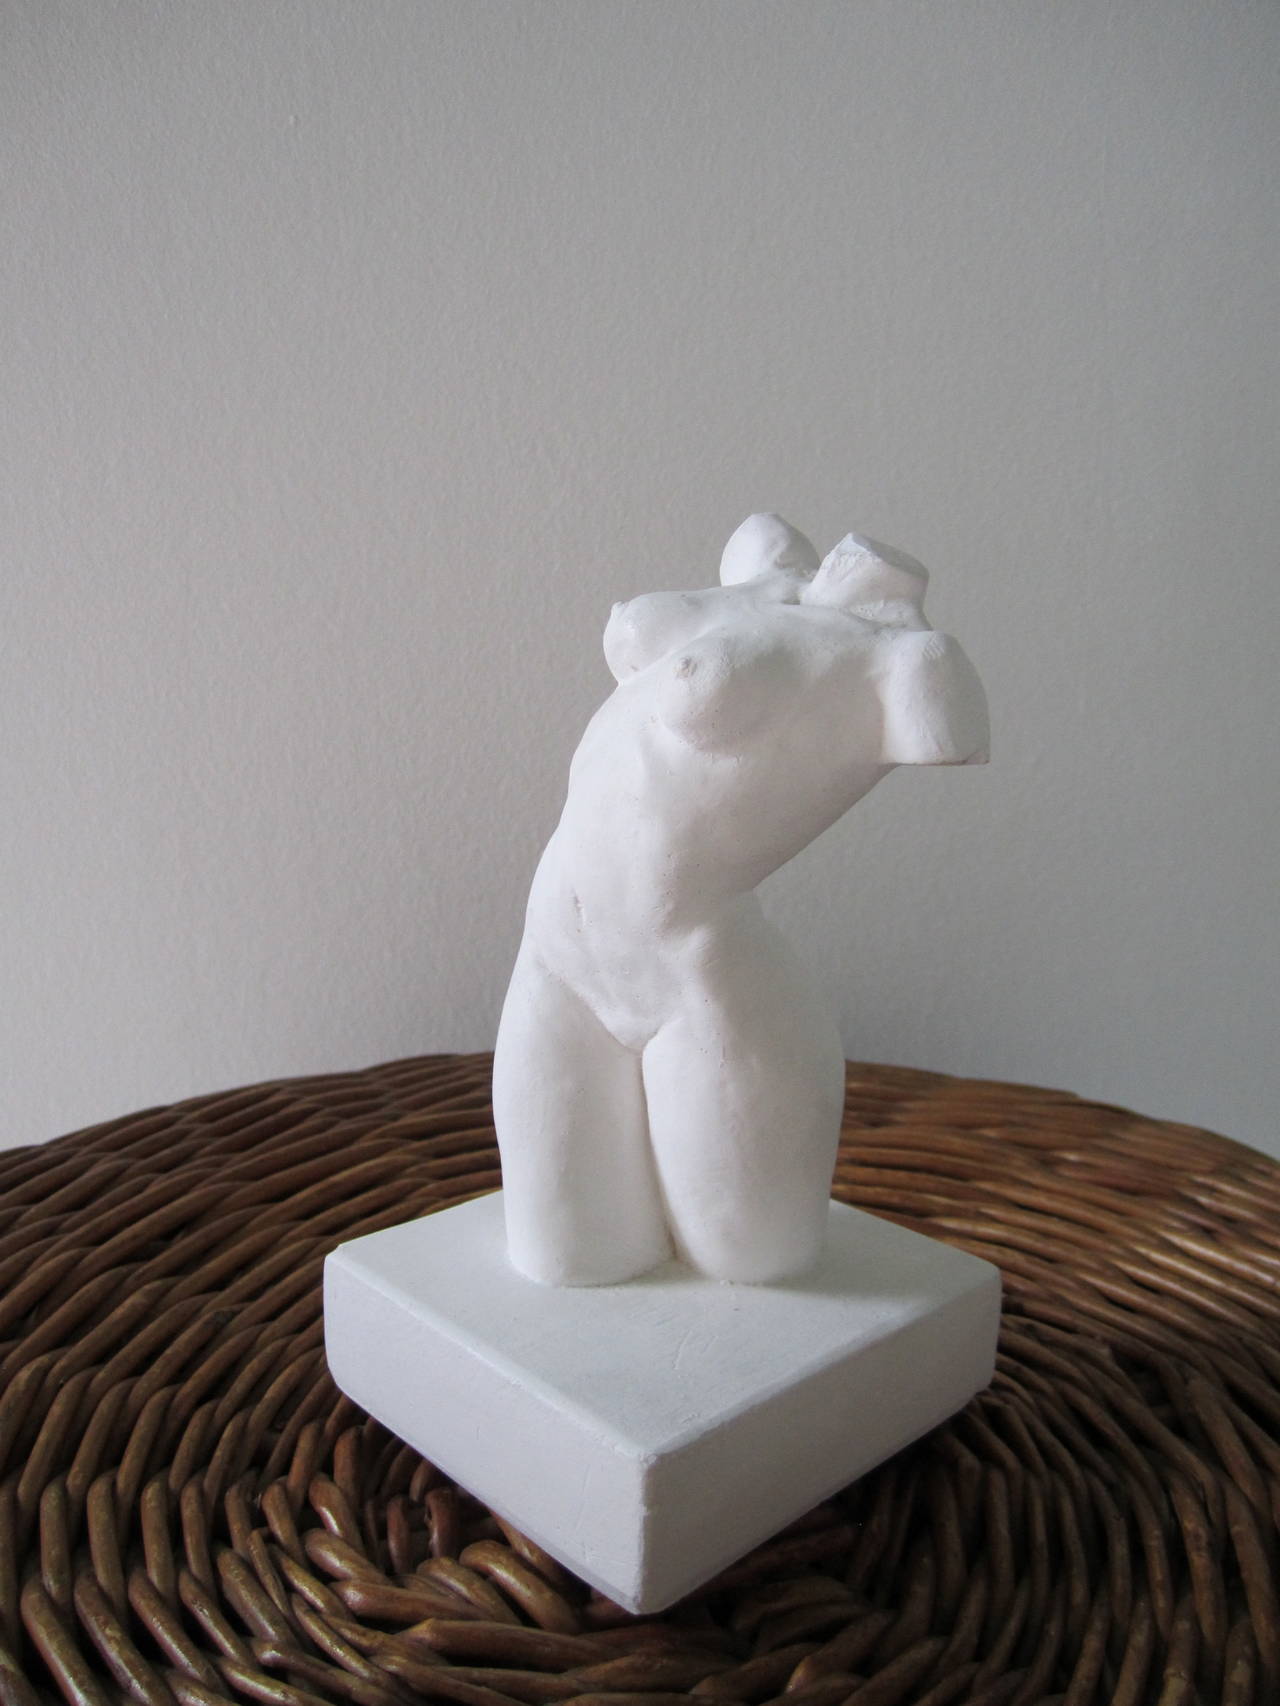 A small vintage female nude torso sculpture bust or torso in white plaster. 

Measures 6.25